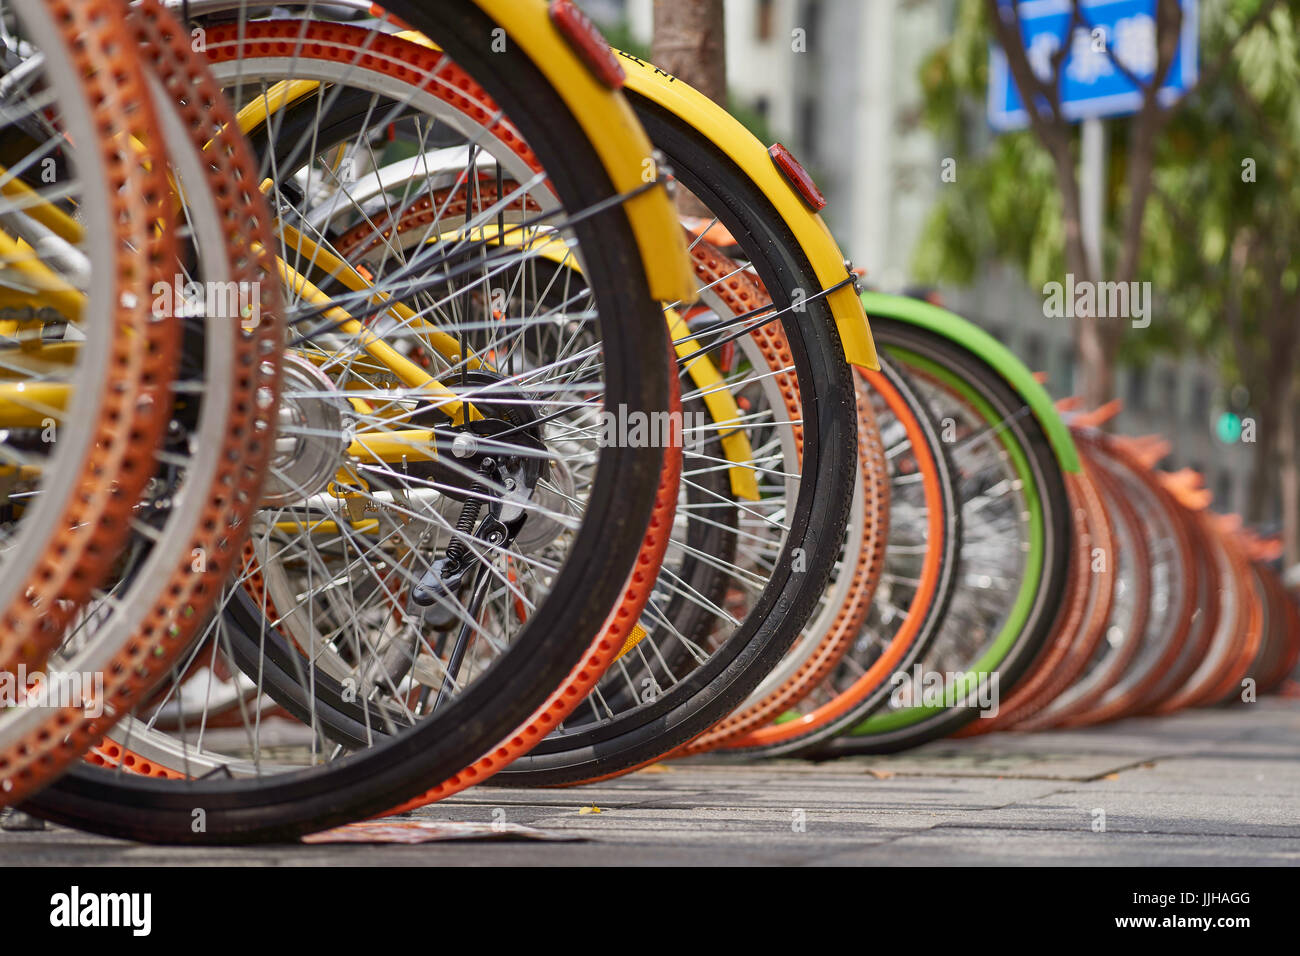 Bicycle wheels - rental share hire bikes in Guangzhou City, China Stock Photo